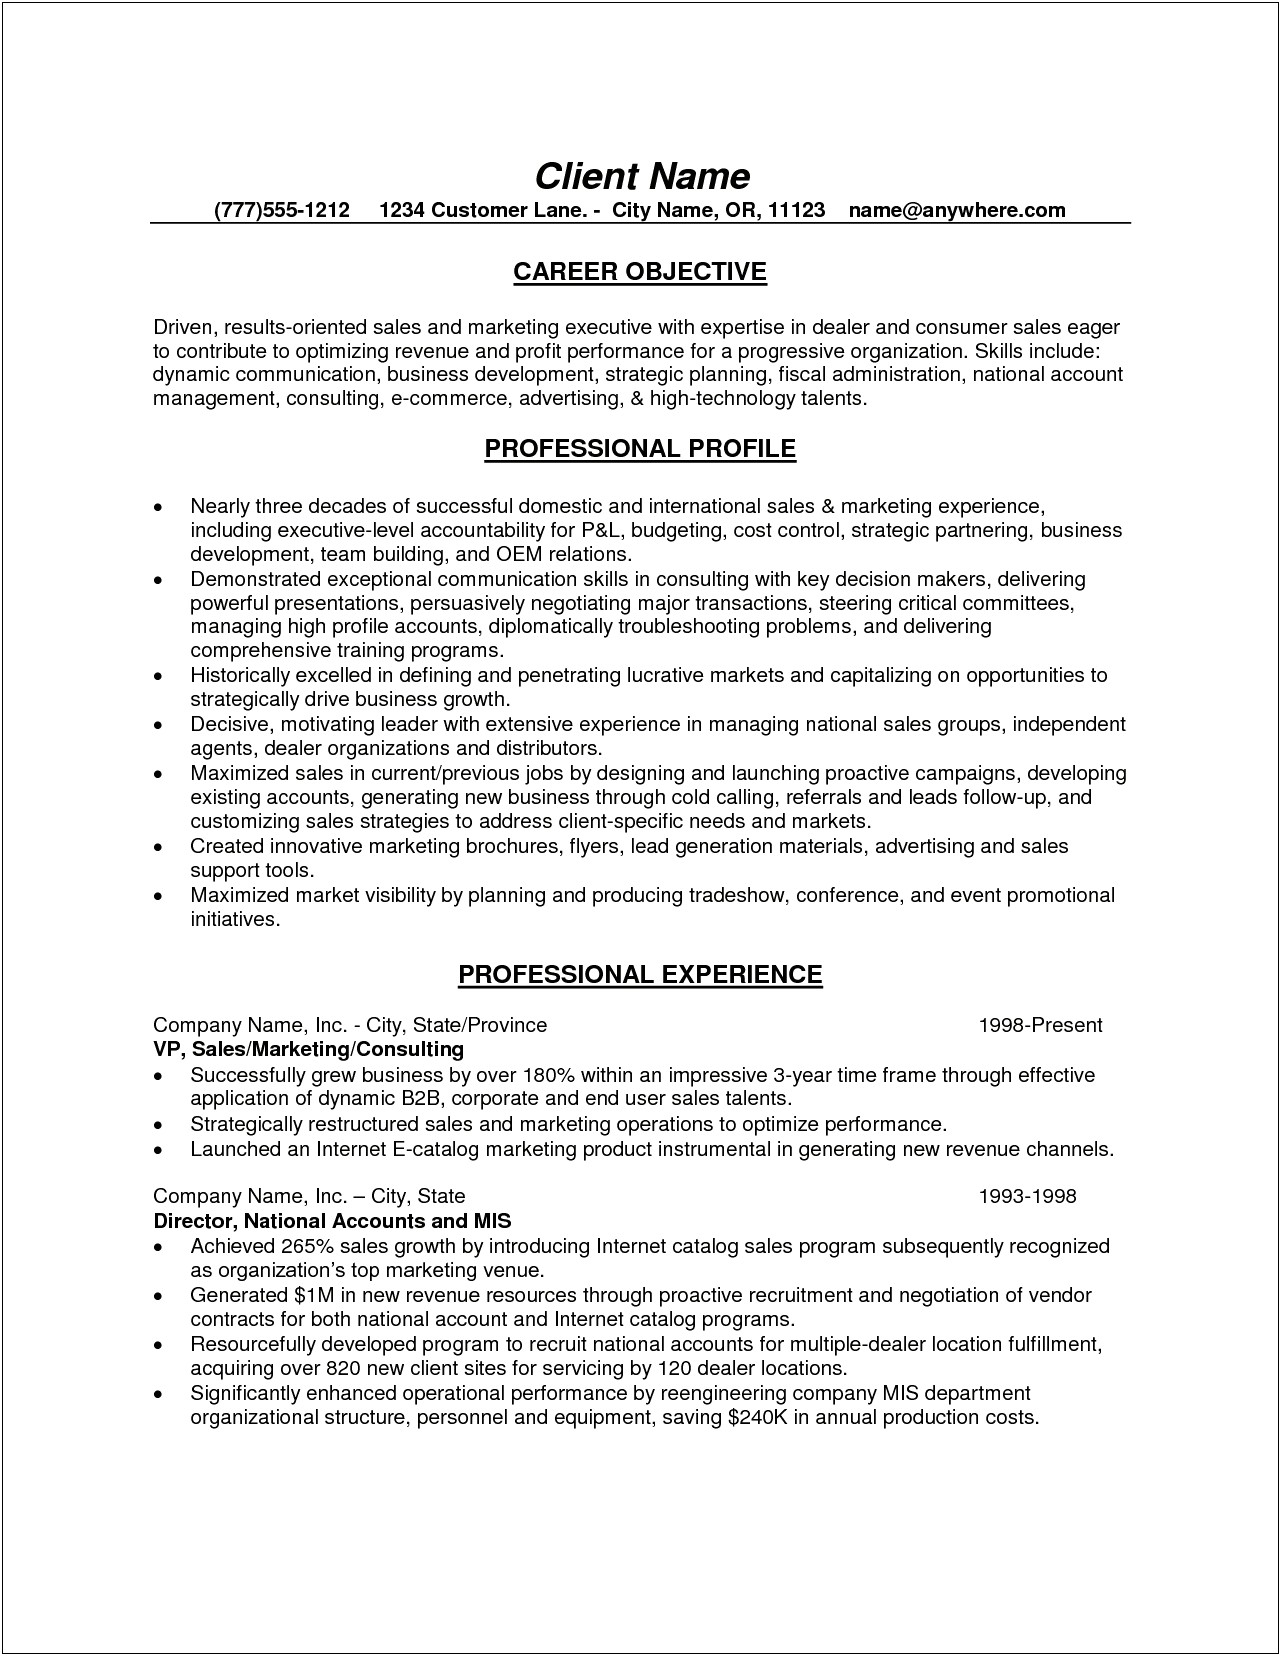 Good Resume Objective For Sales Position